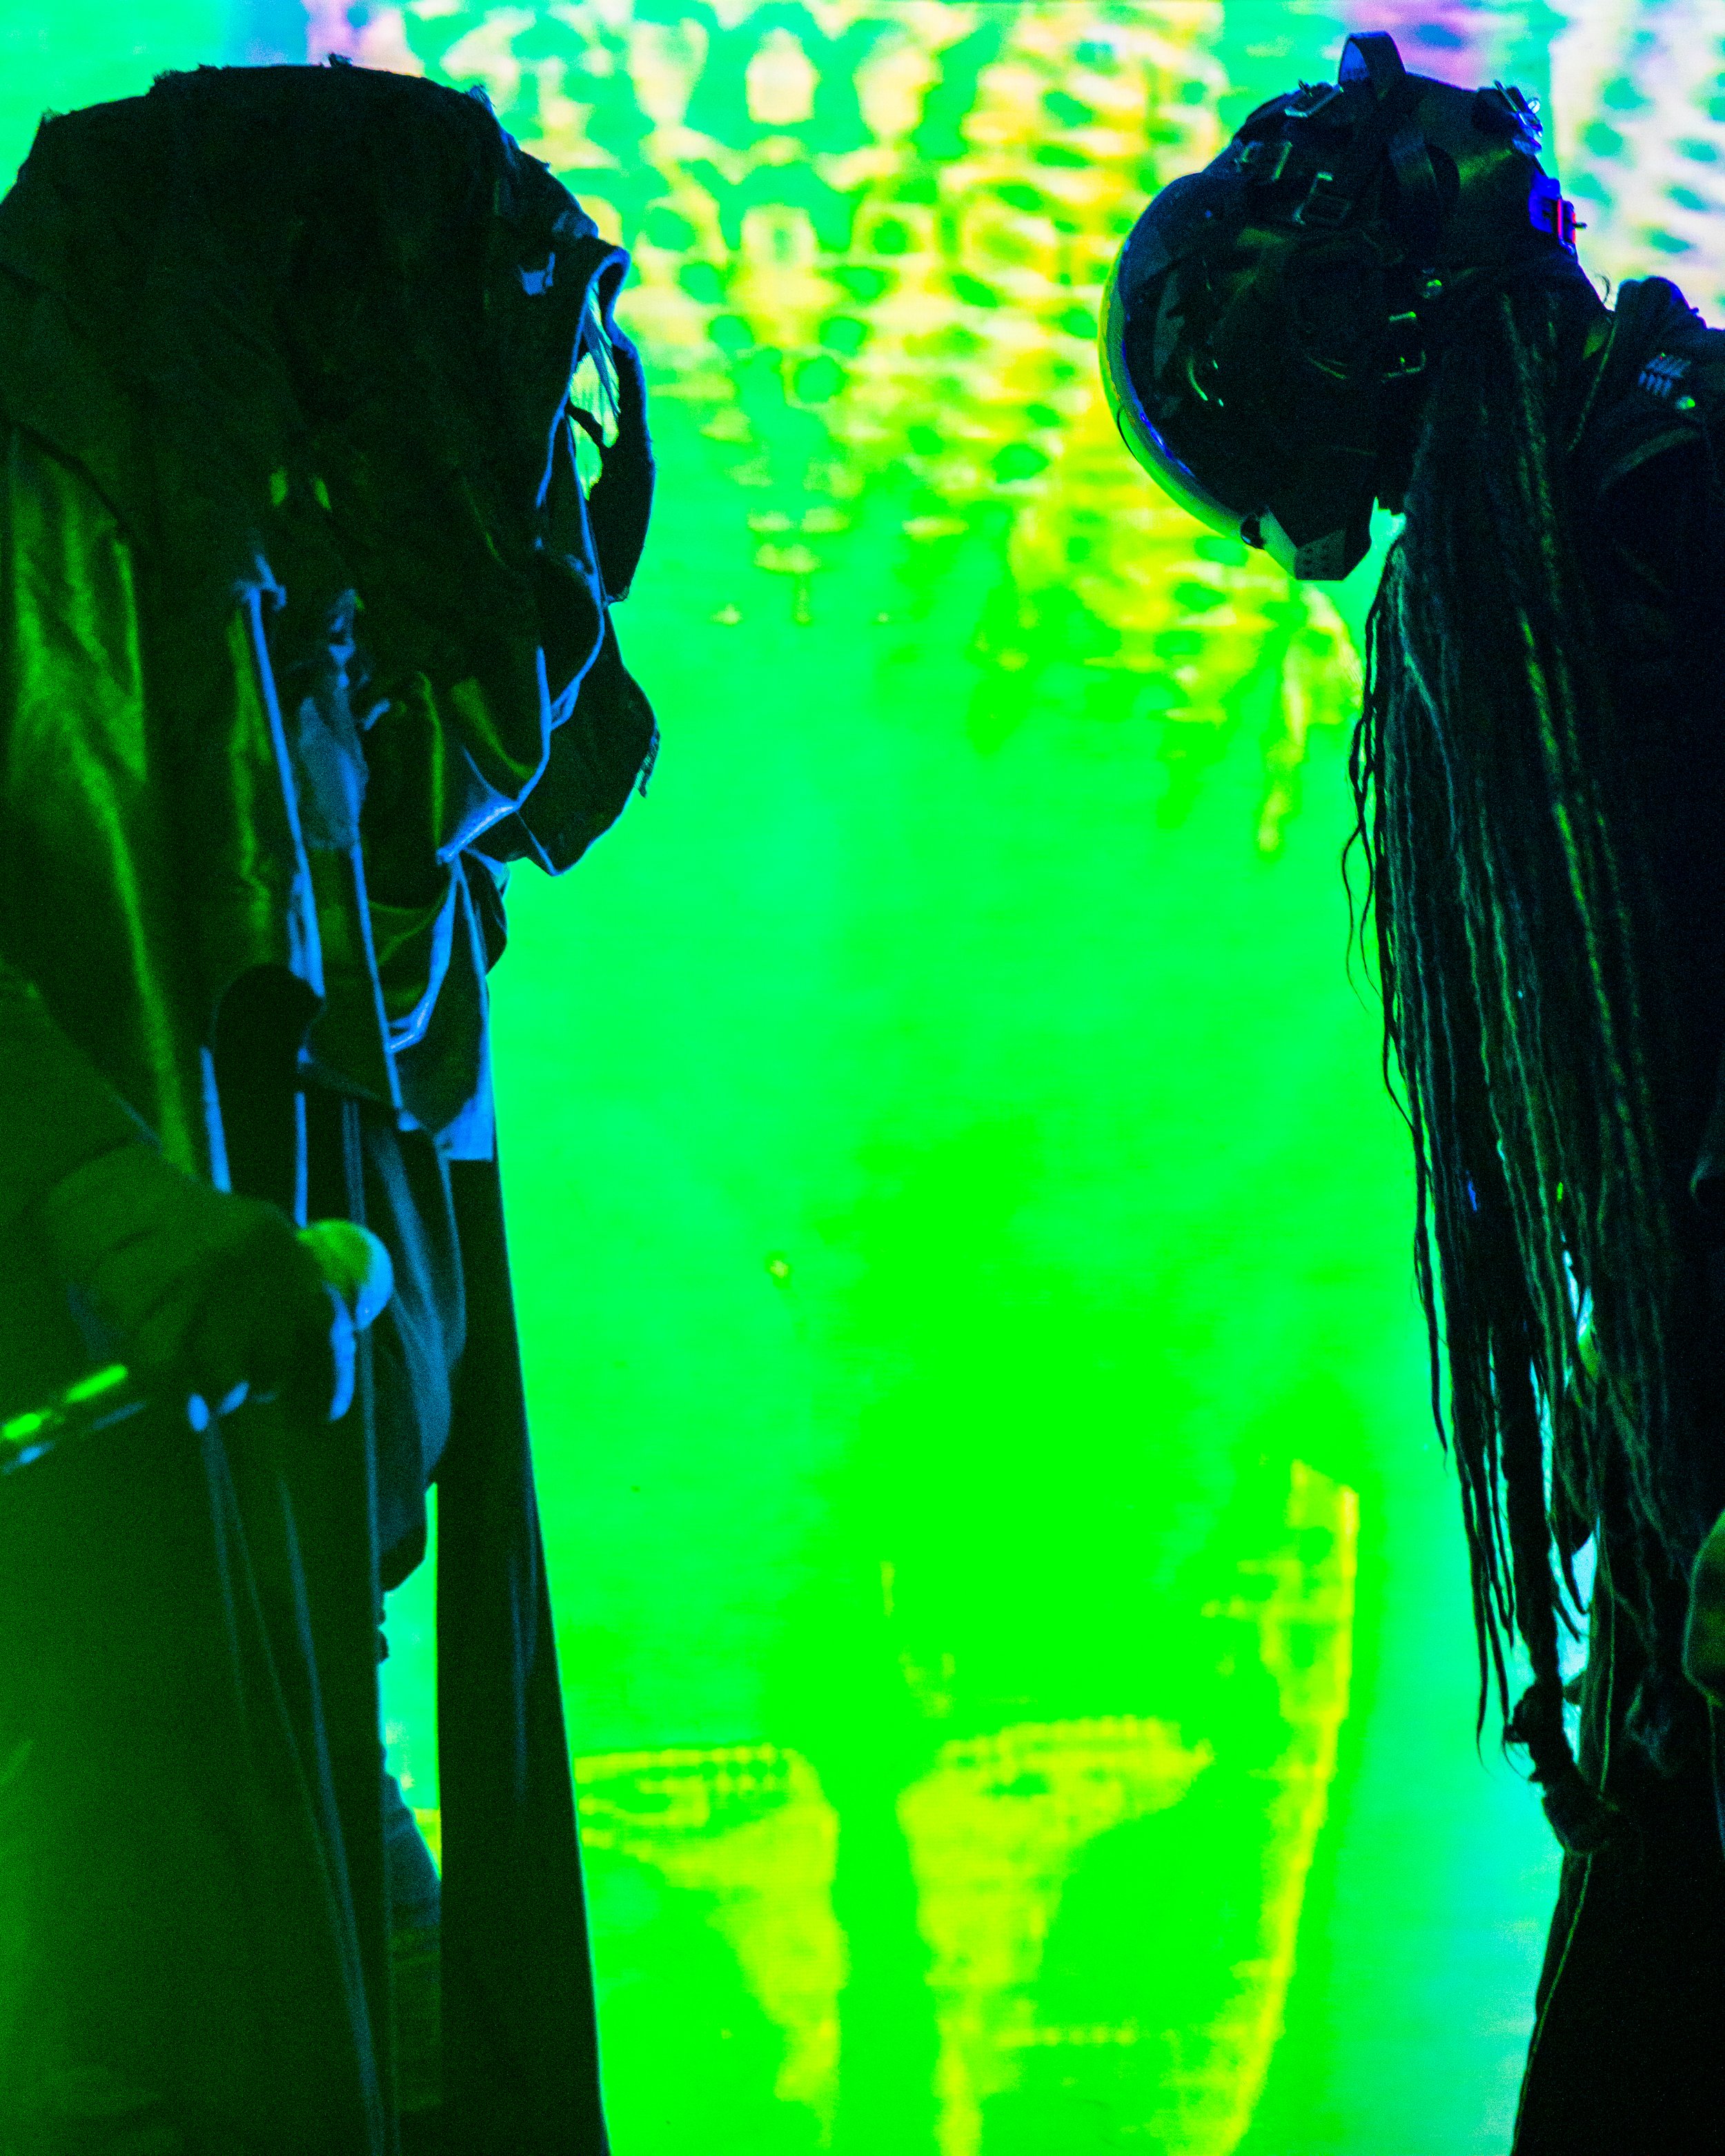 Skinny Puppy - FINAL TOUR - Fillmore Auditorium - Denver, Colorado - Wednesday, May 3, 2023 - PHOTO BY Mowgli Miles of Interracial Friends-79.JPG